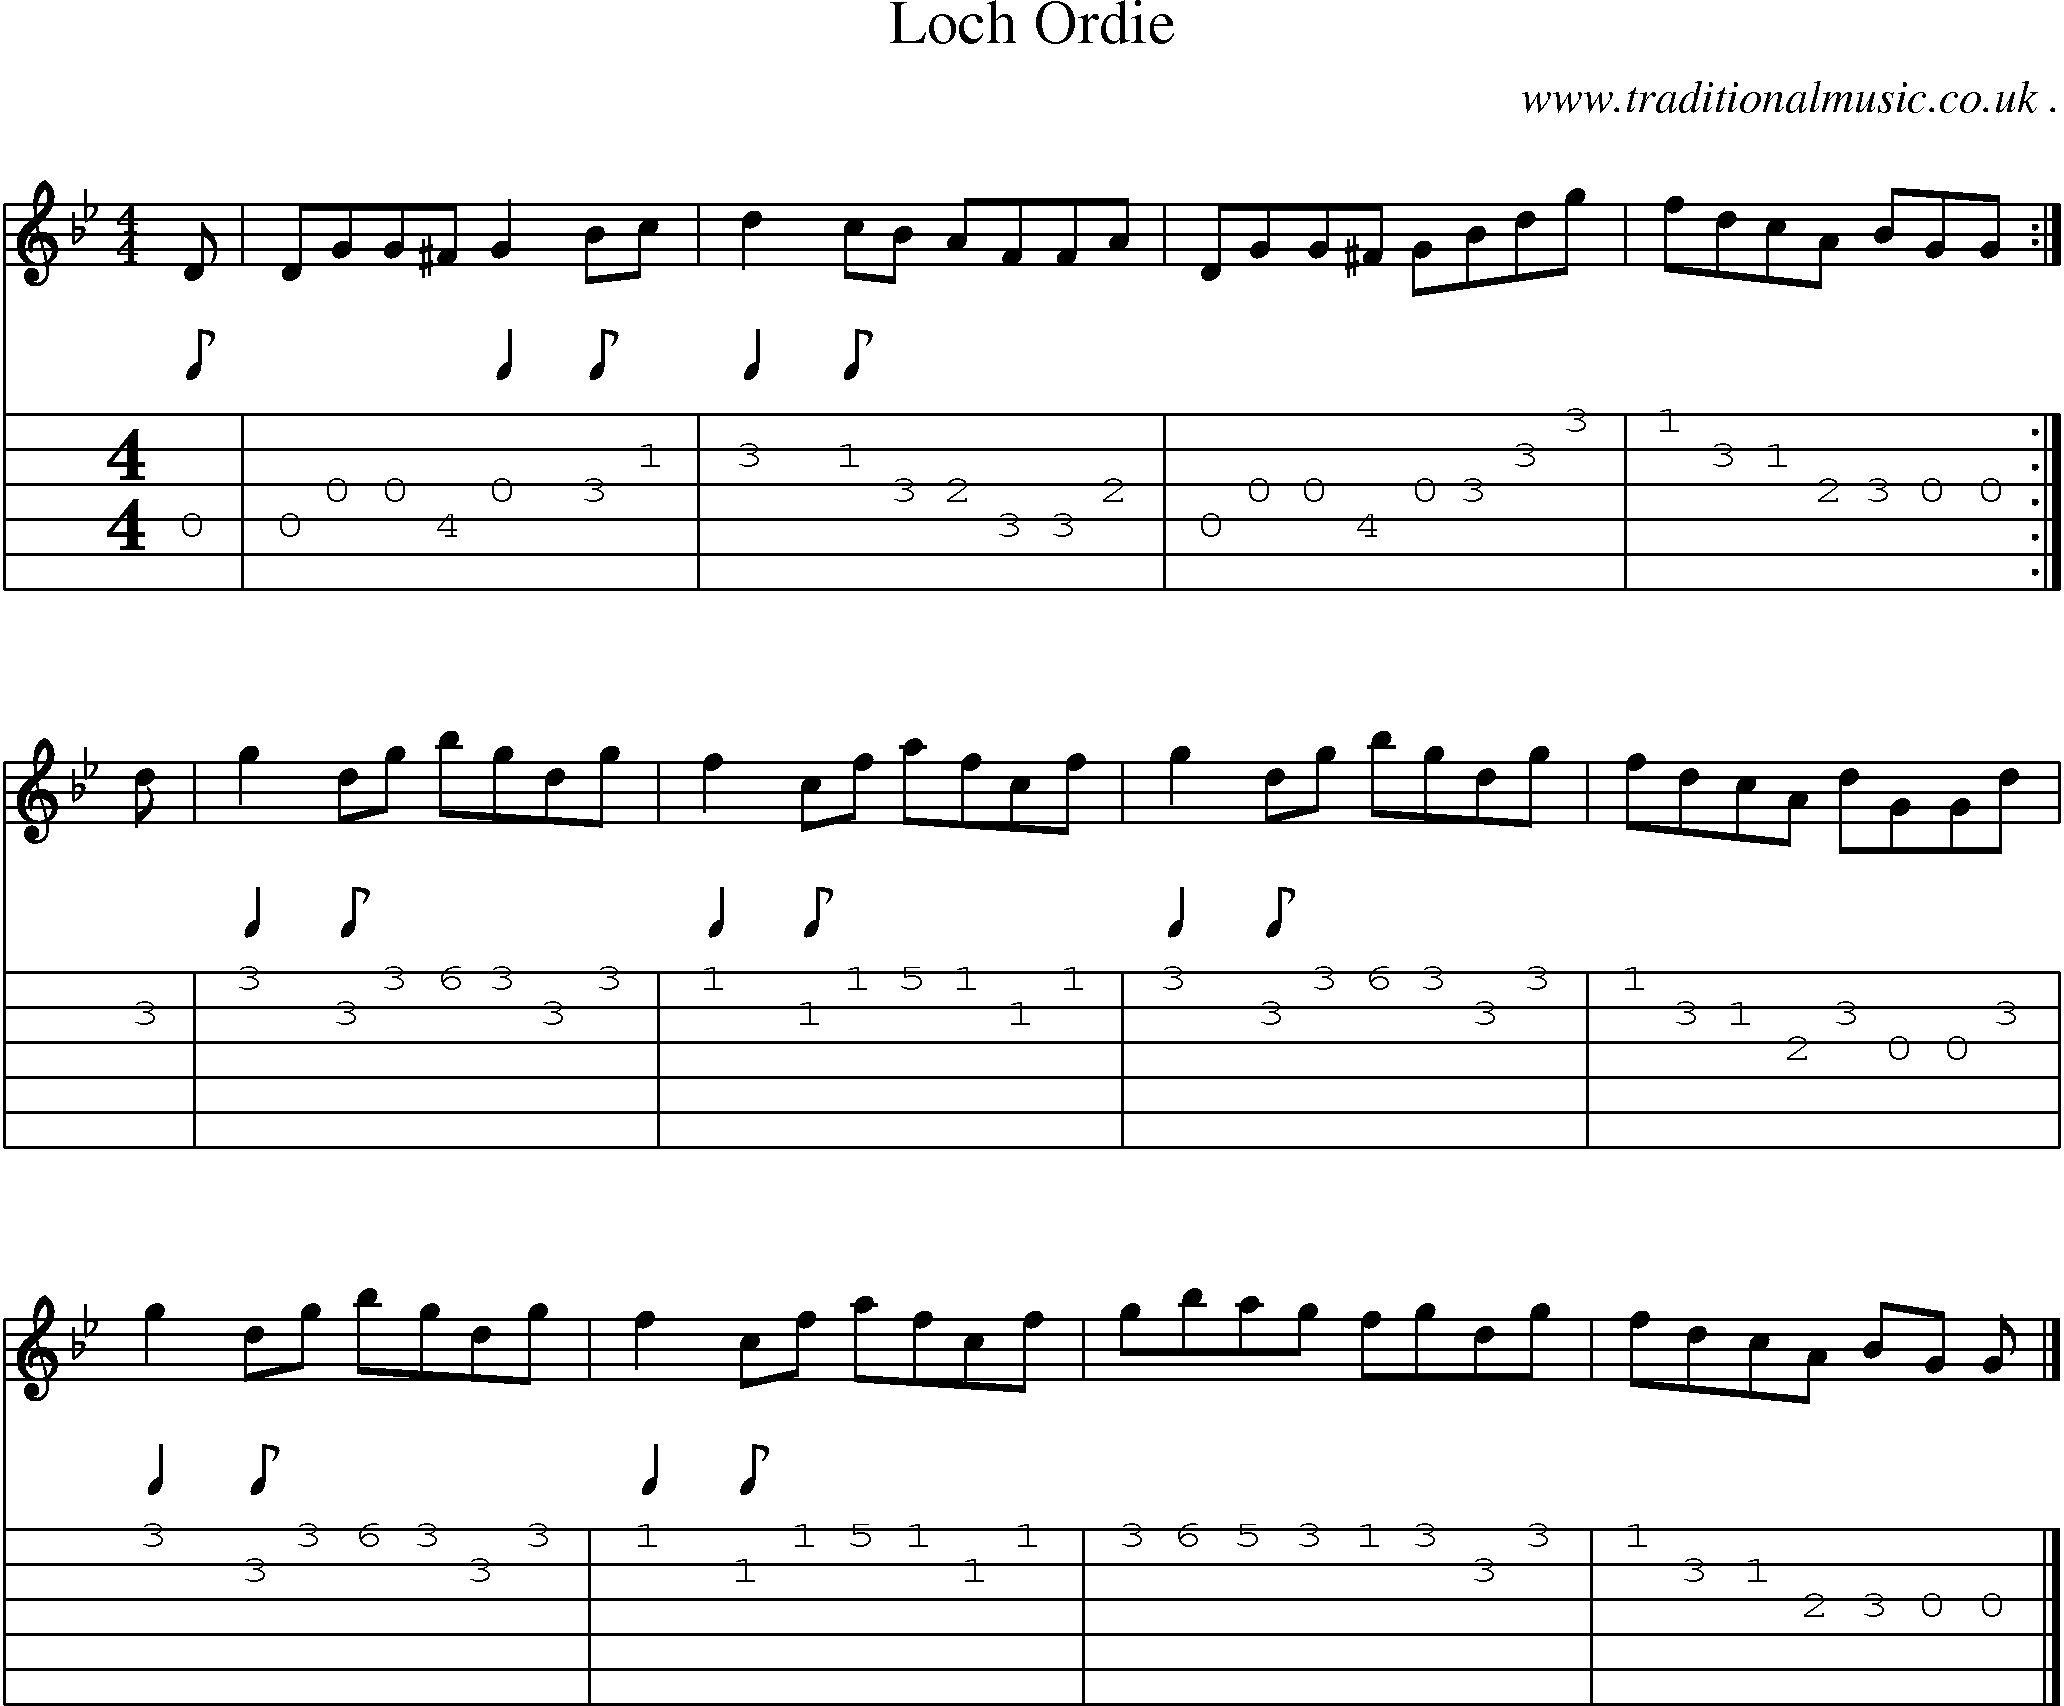 Sheet-music  score, Chords and Guitar Tabs for Loch Ordie